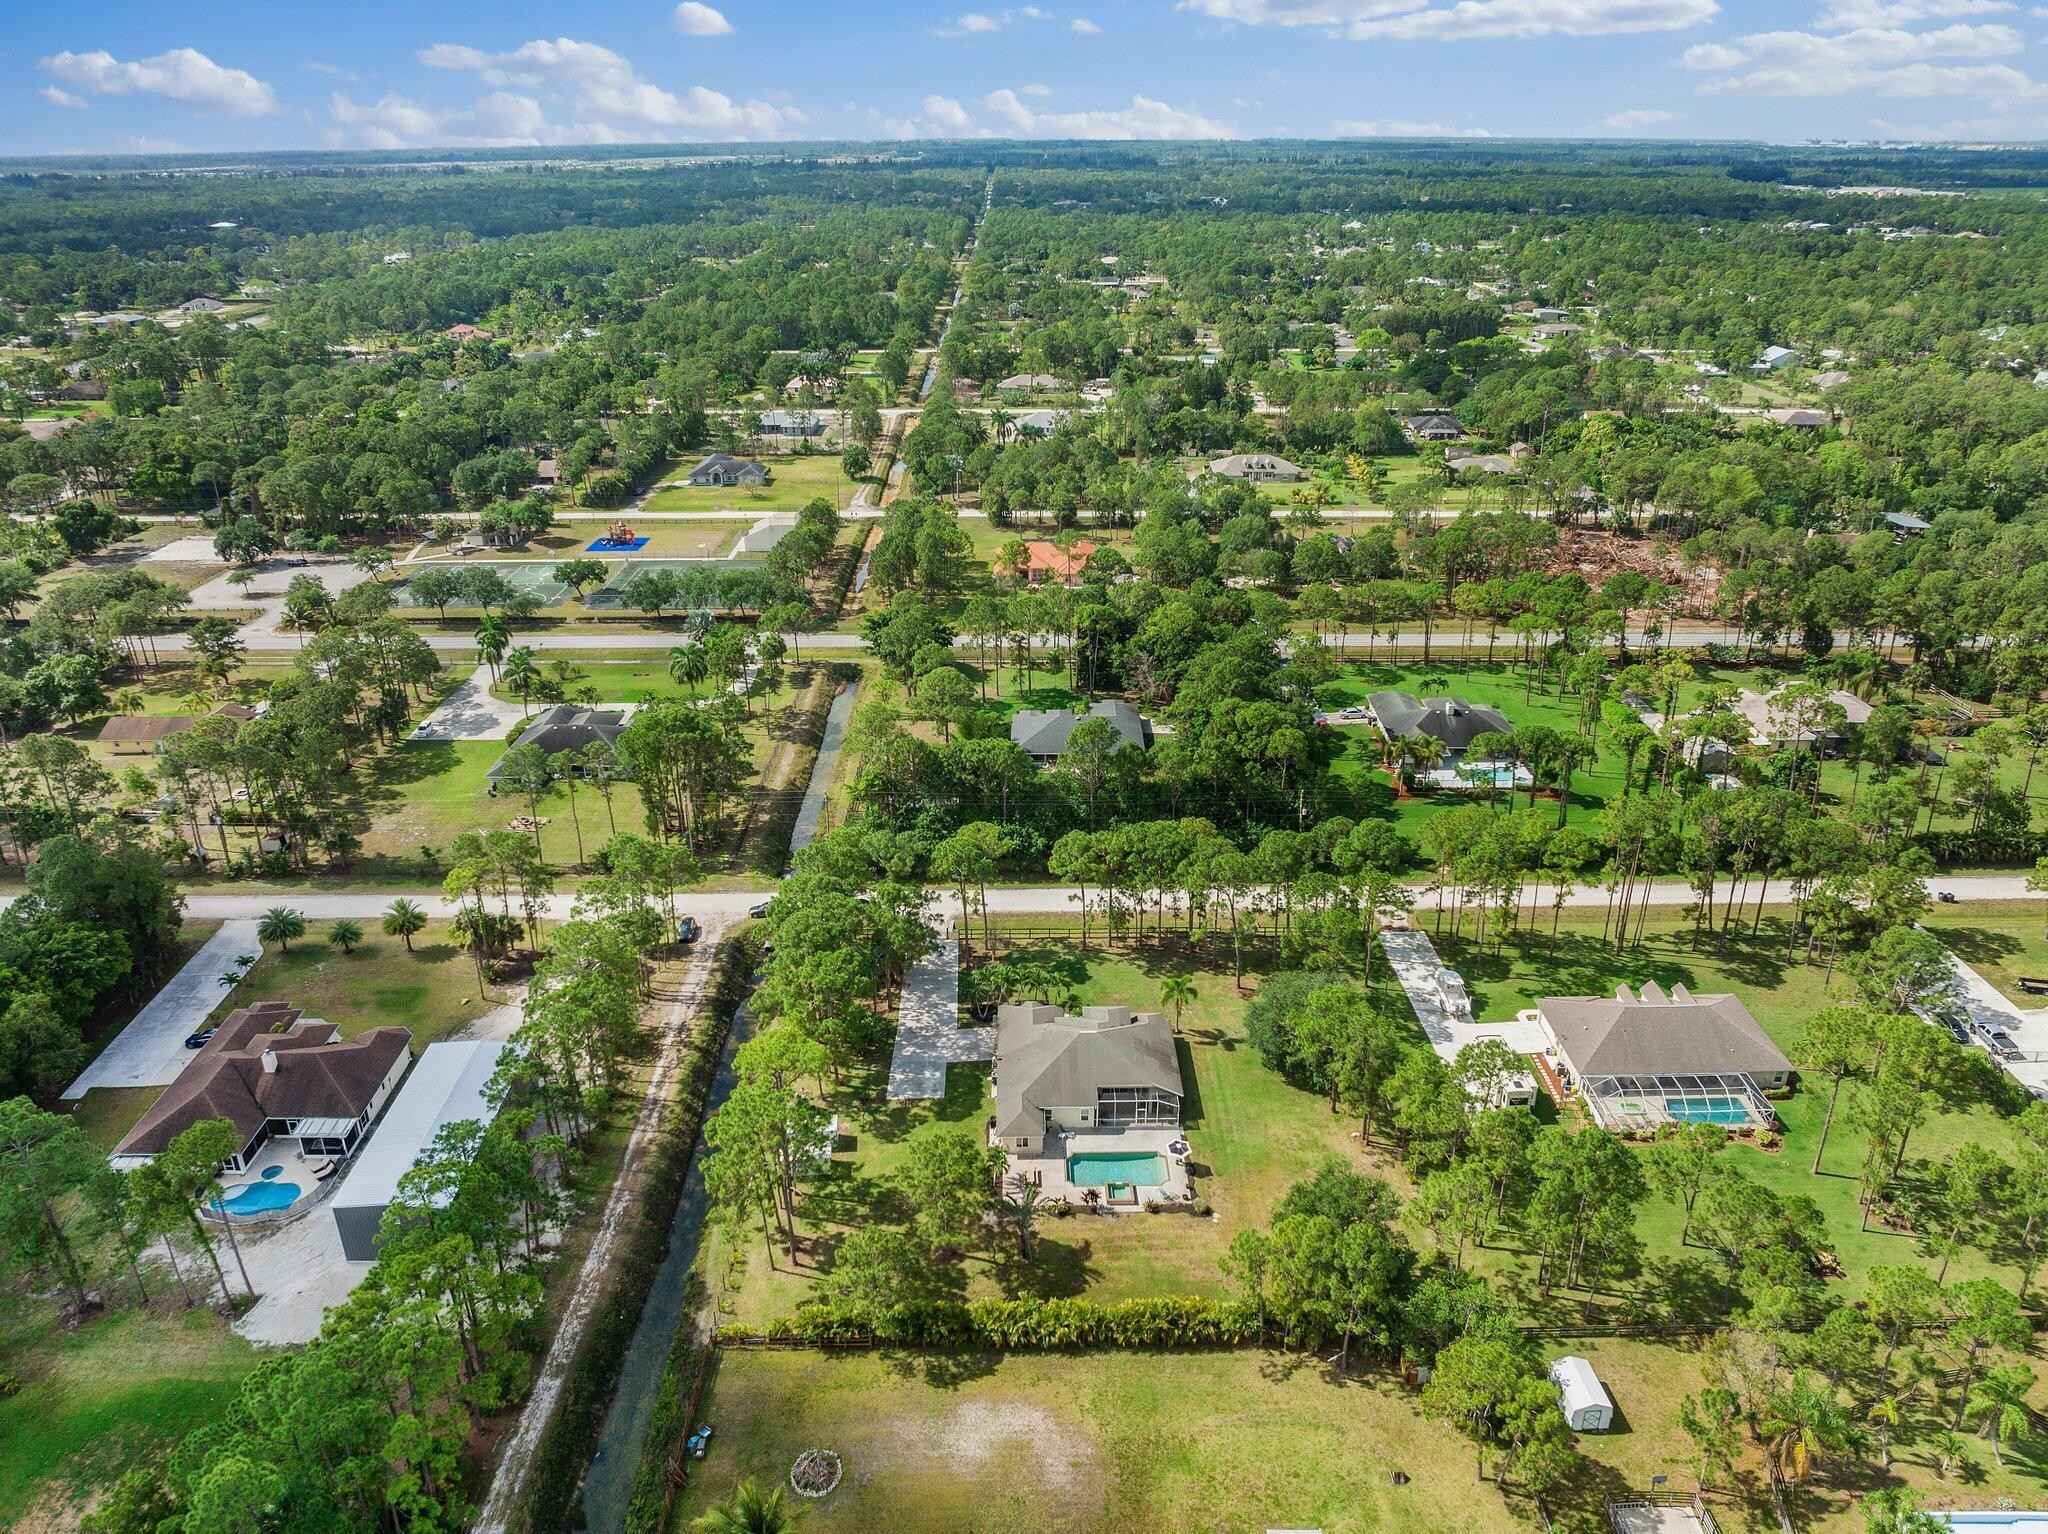 loxahatchee homes drone view